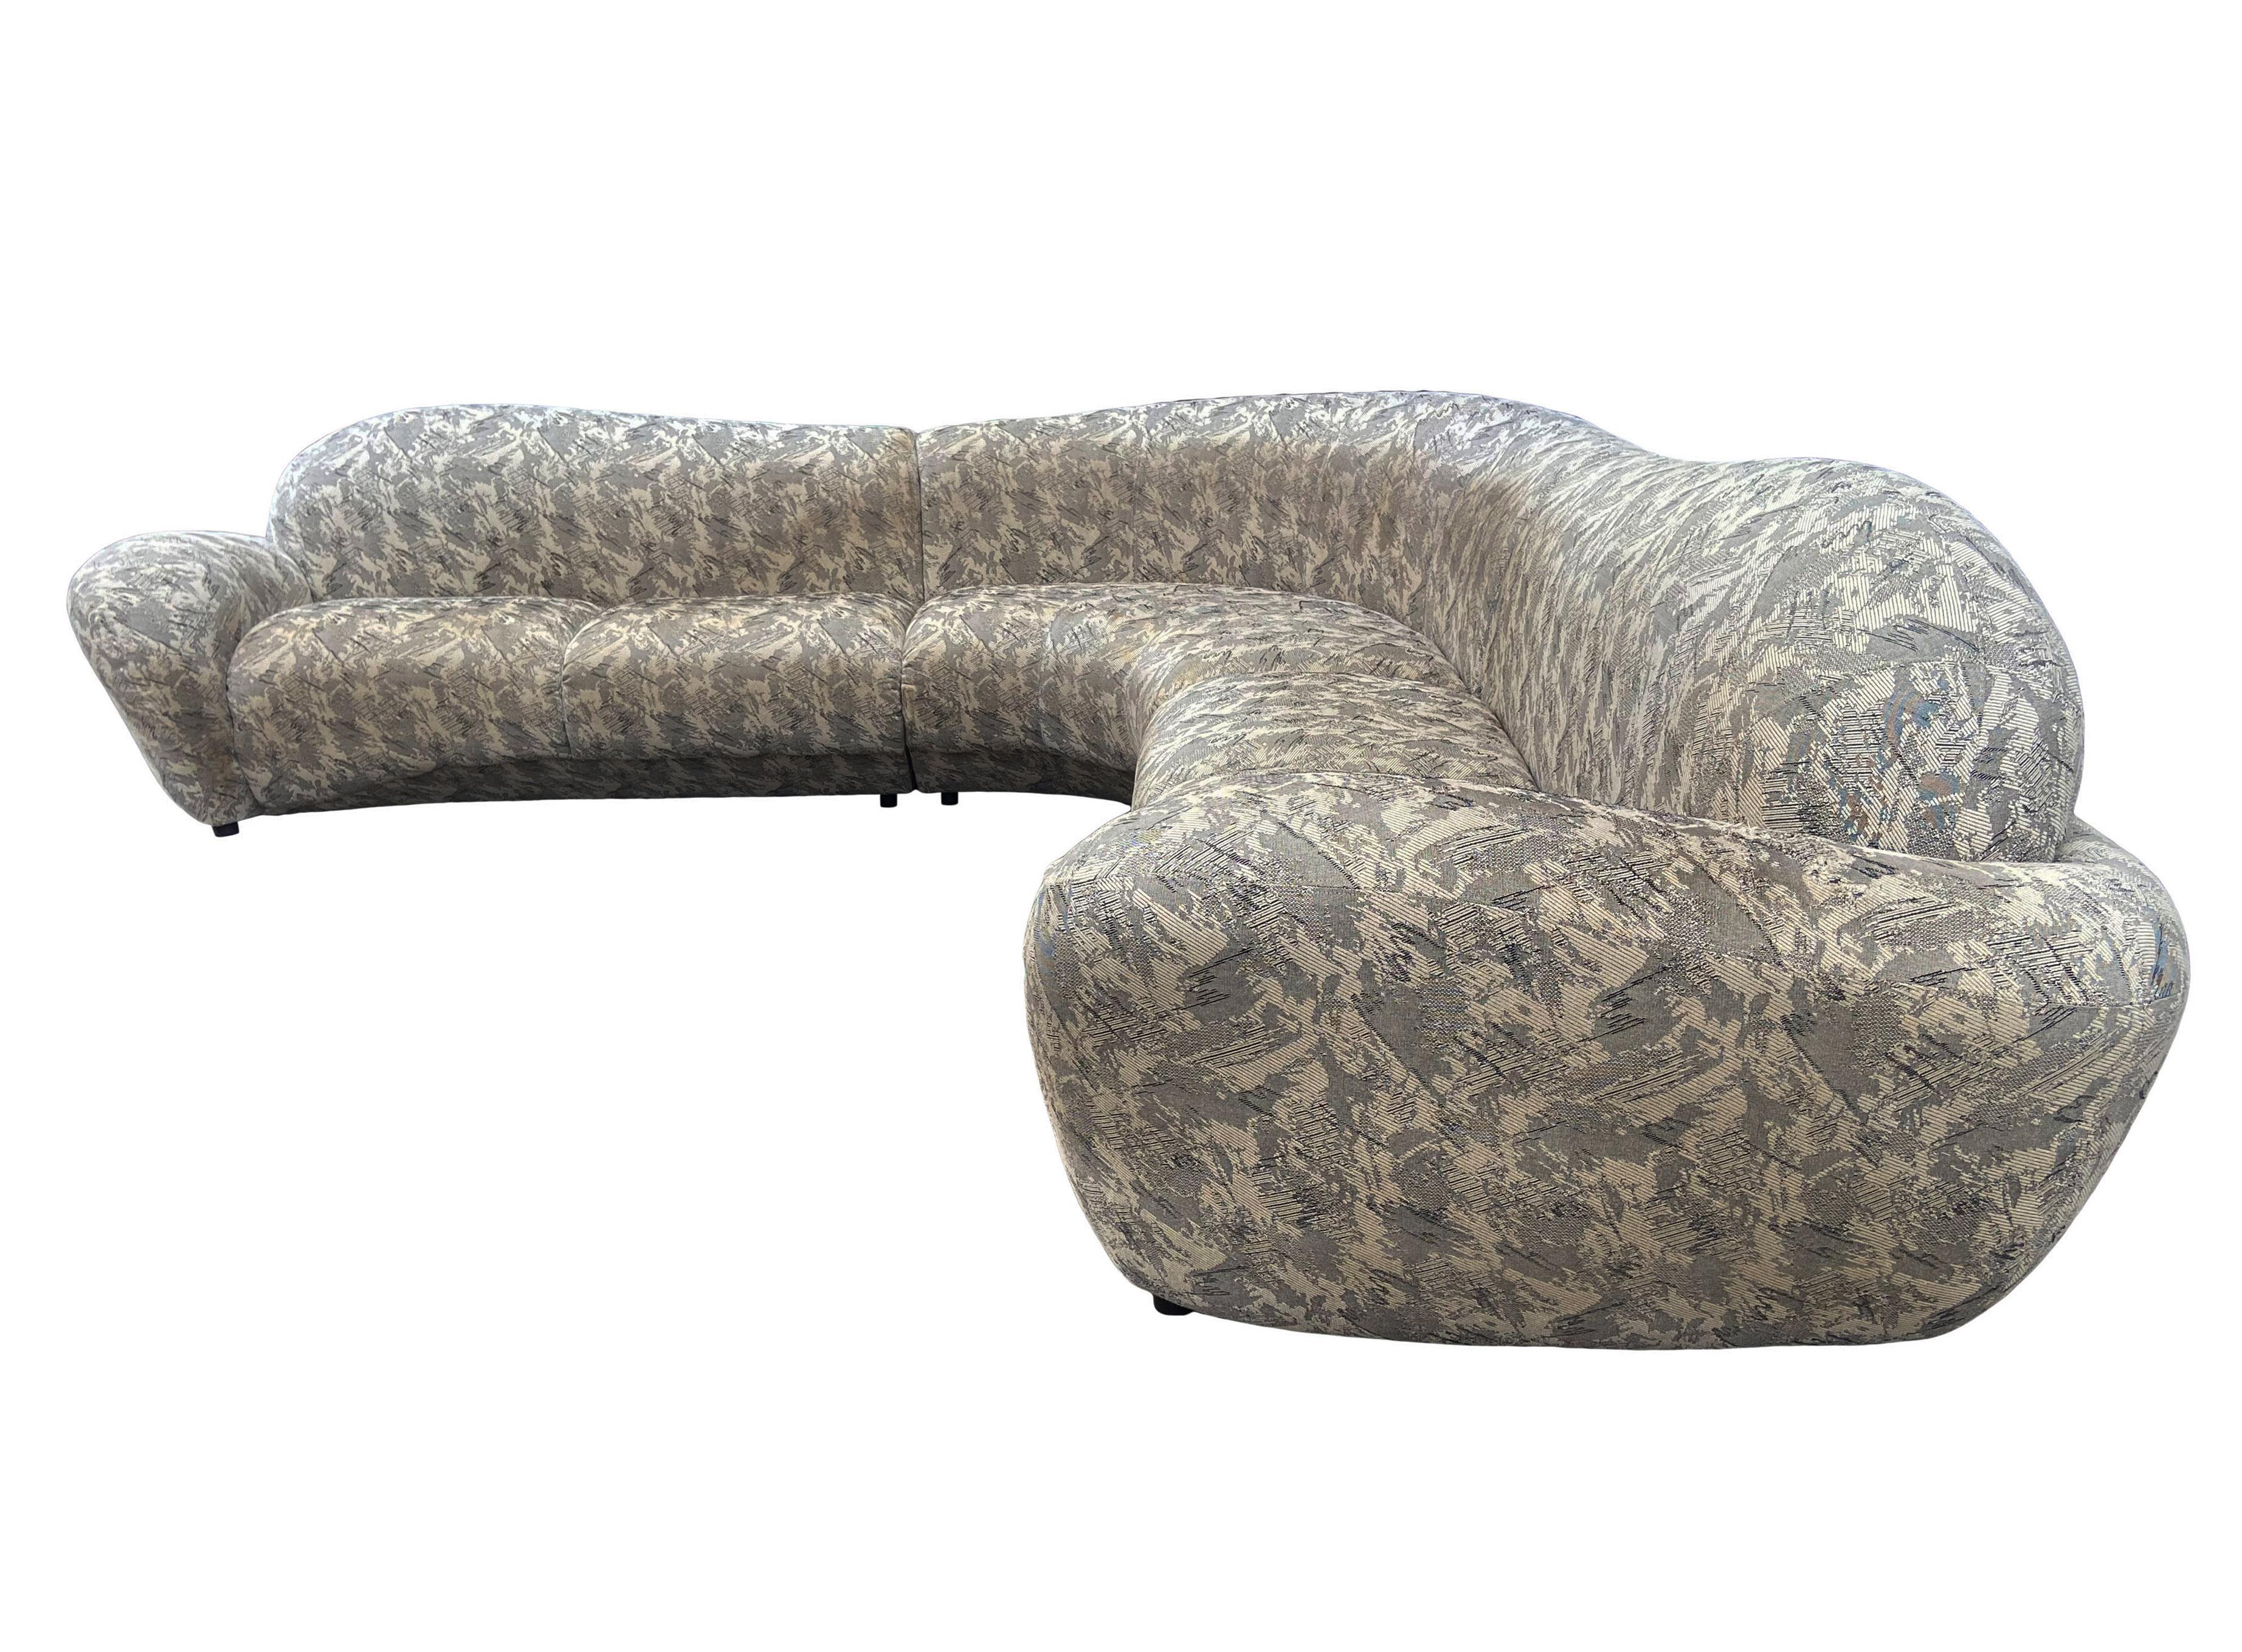 Mid-Century Modern Curved and Sculptural Sectional Serpentine Sofa by Weiman 1